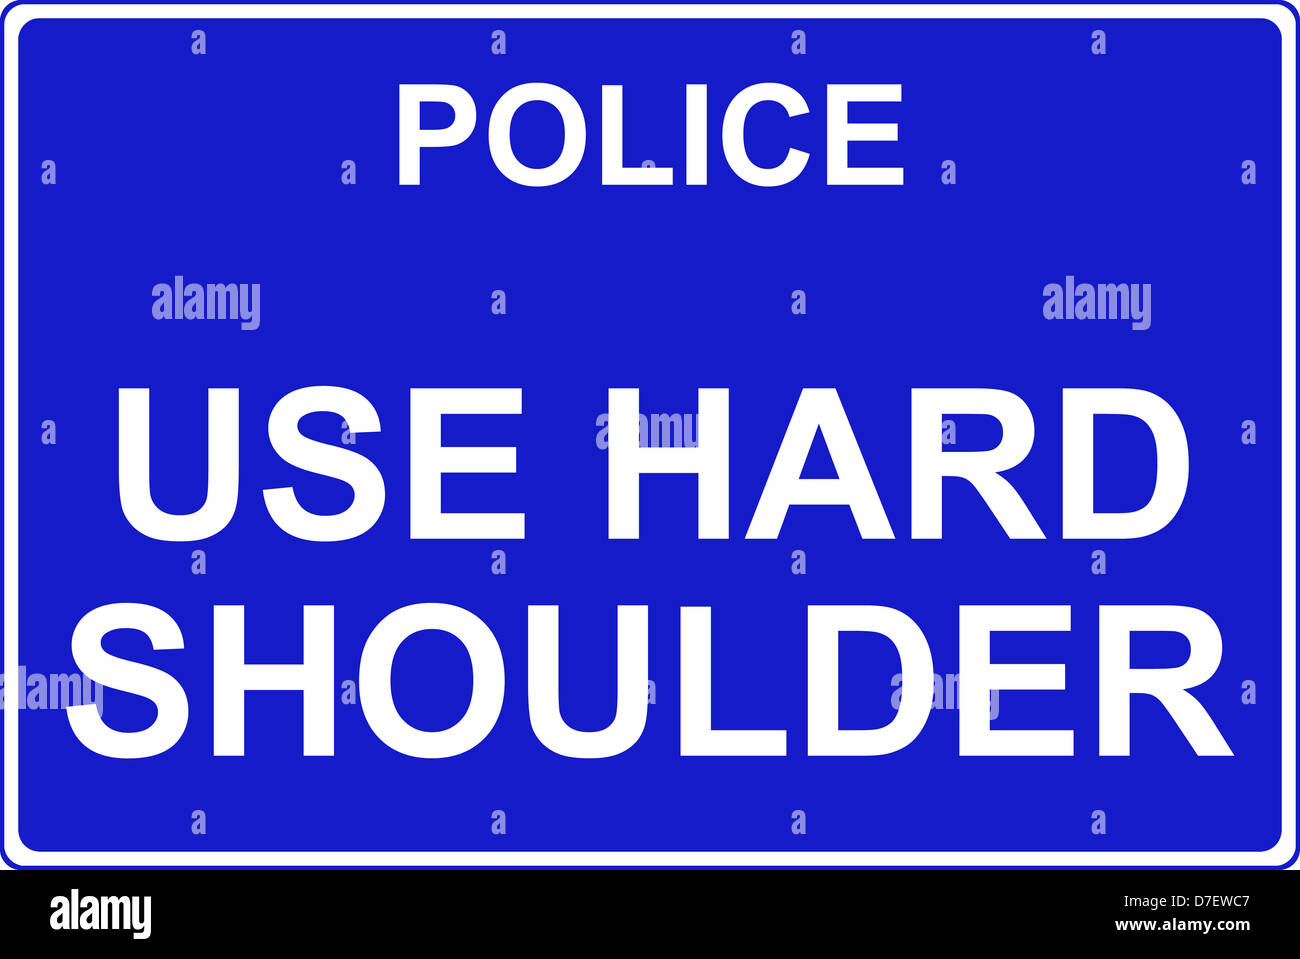 Police use hard shoulder when the vehicle has been in an accident or broken down motorway traffic safety sign Stock Photo